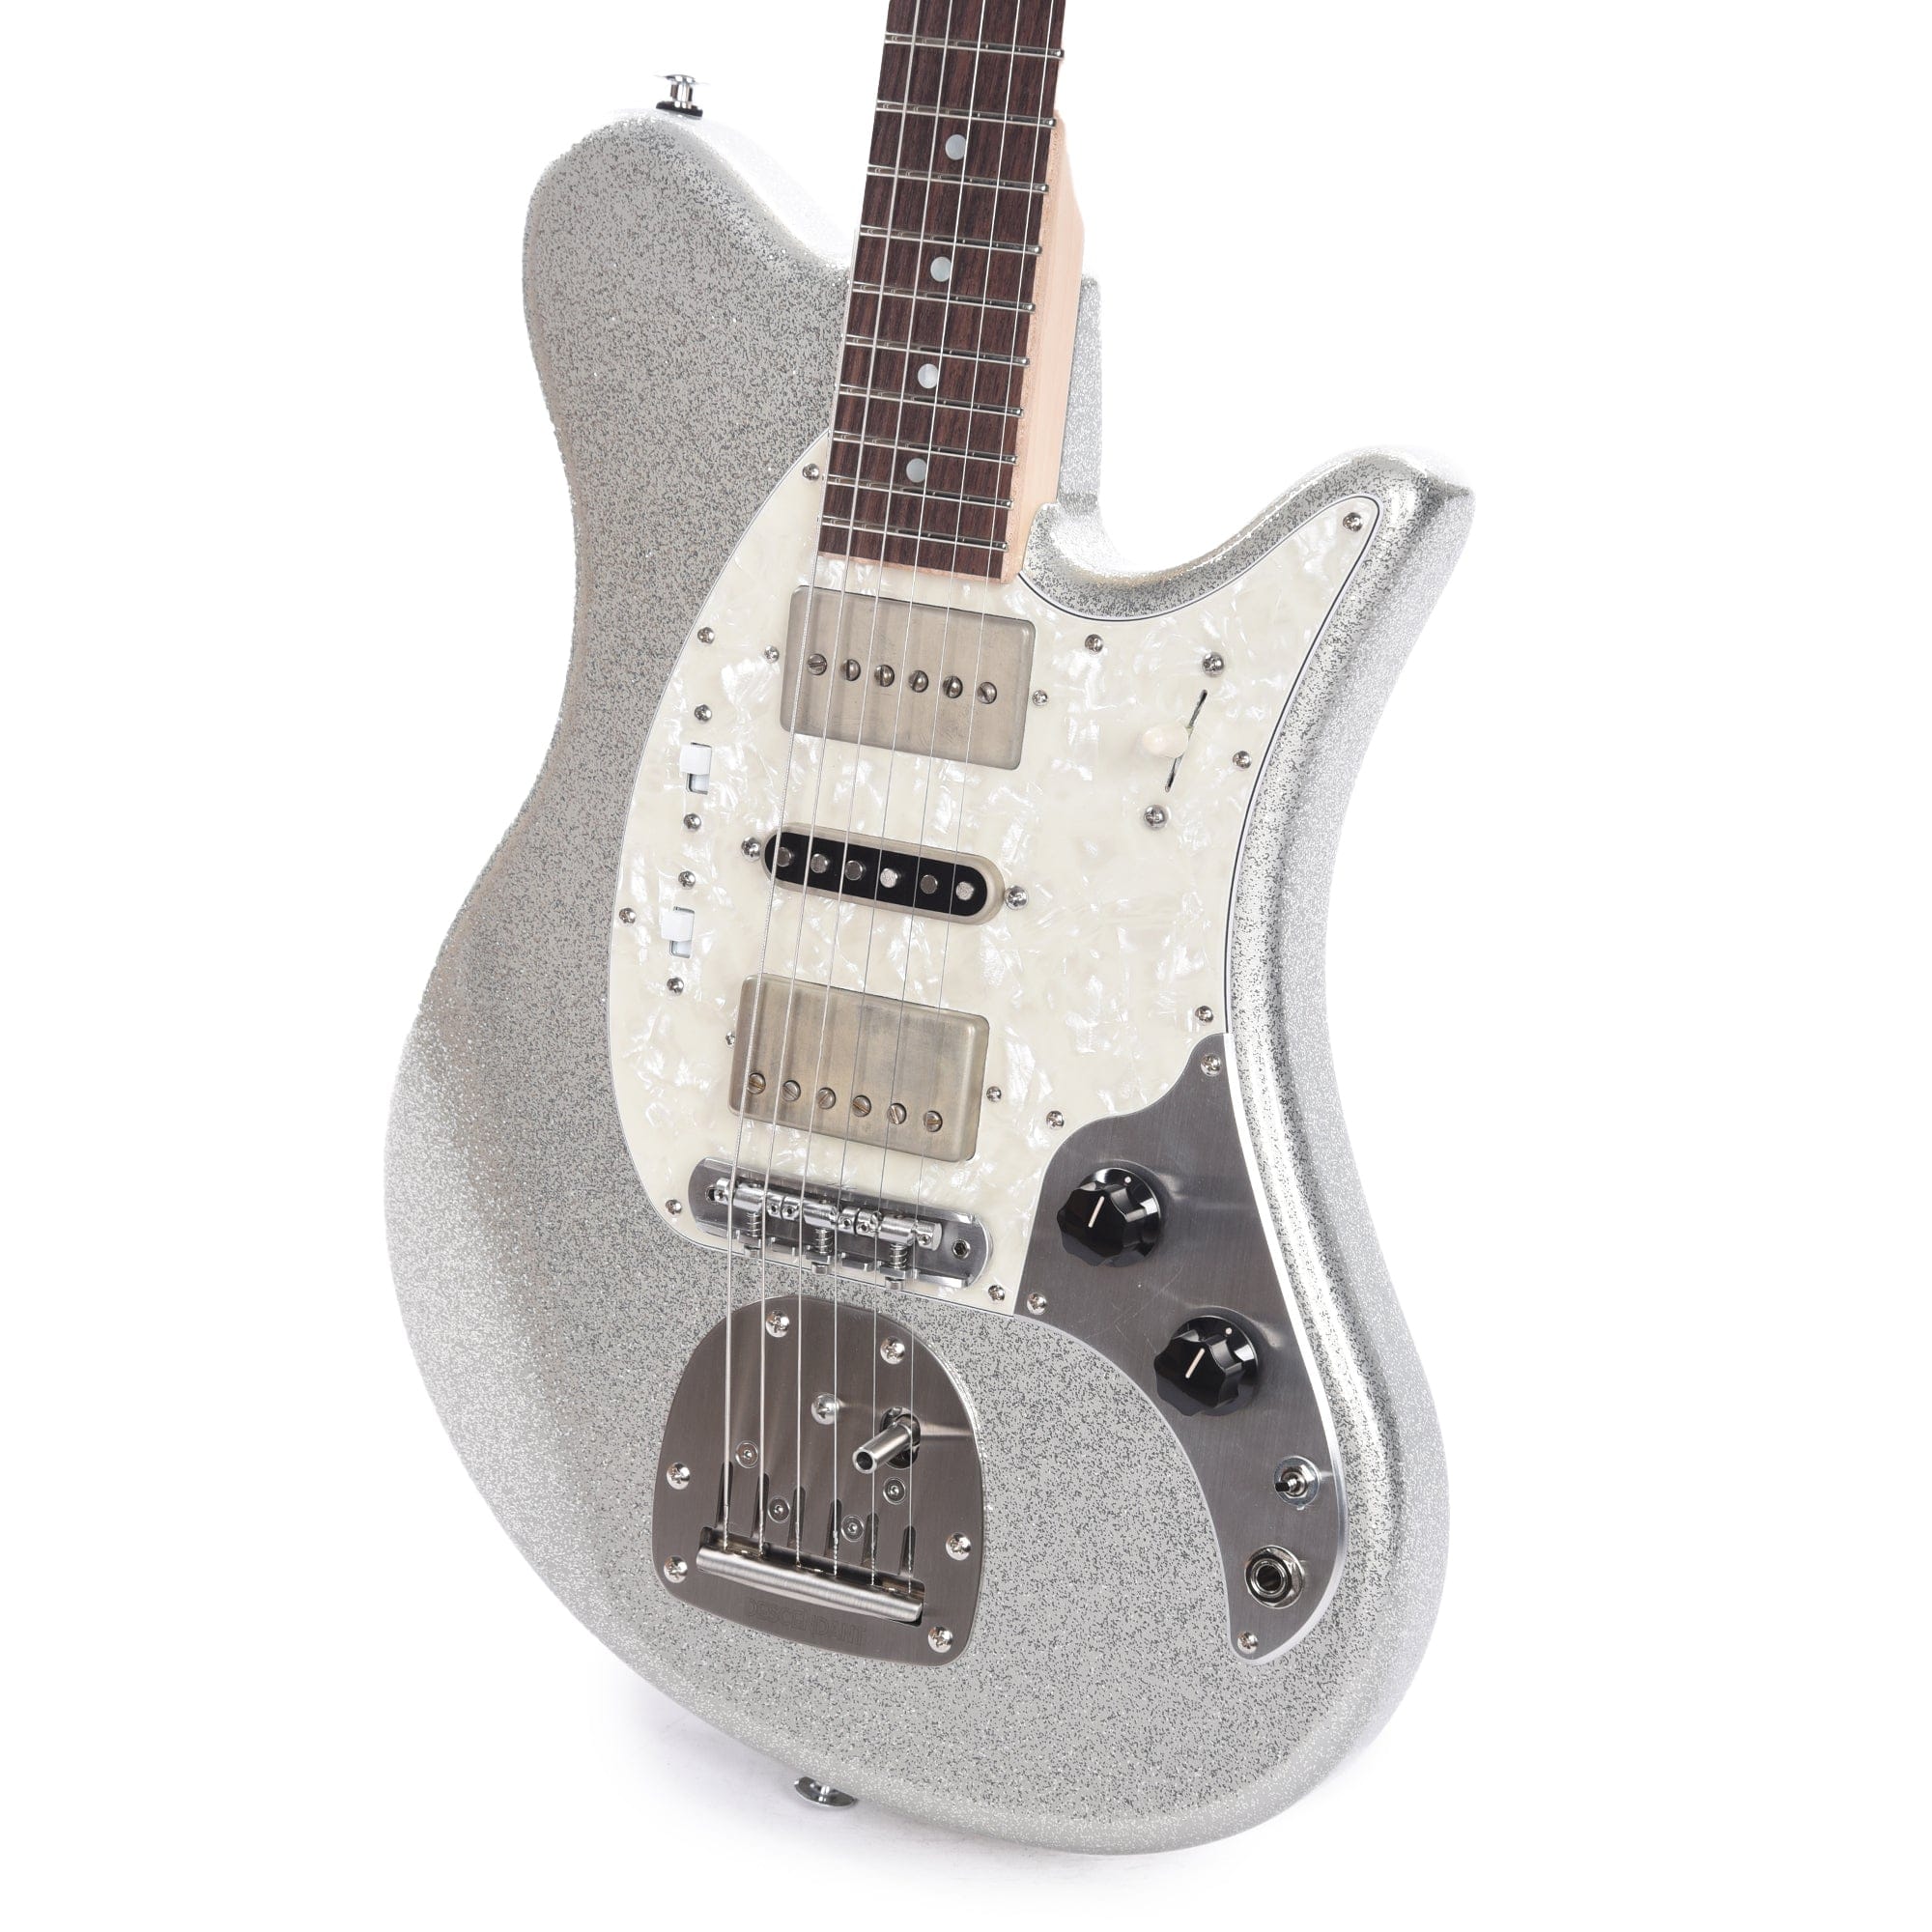 OOPEGG Supreme Collection Trailbreaker Mark-I Silver Sparkle Electric Guitars / Solid Body